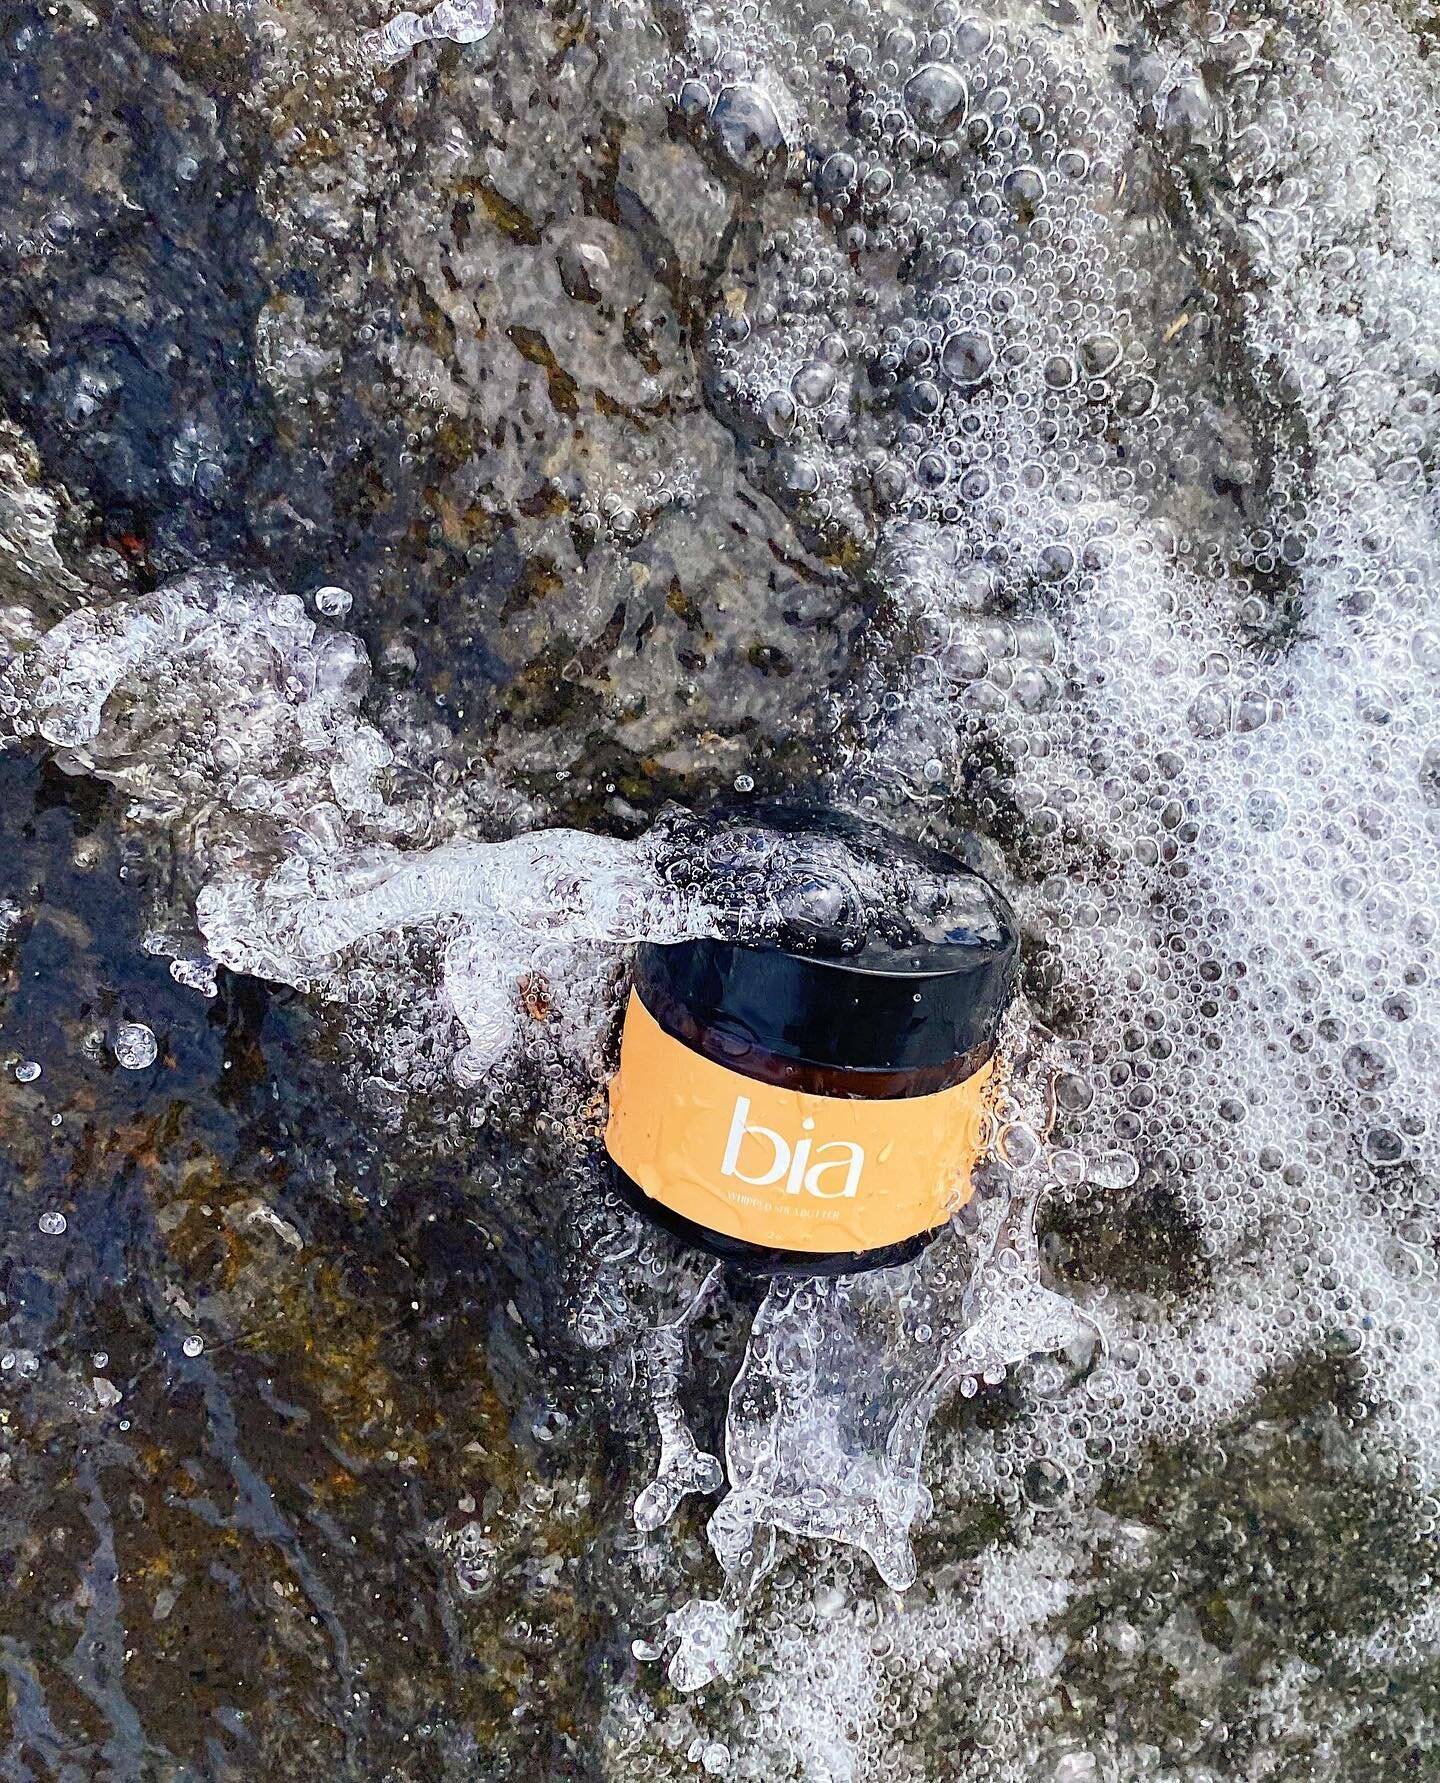 We&rsquo;re making a splash💦 while on vacation but we can&rsquo;t forget to stay hydrated and moisturized with our Whipped Shea Butter✨

Available @blackowned.to&rsquo;s retail shop @shopstc or hit the link in our bio to purchase✨

#skincare #endofs